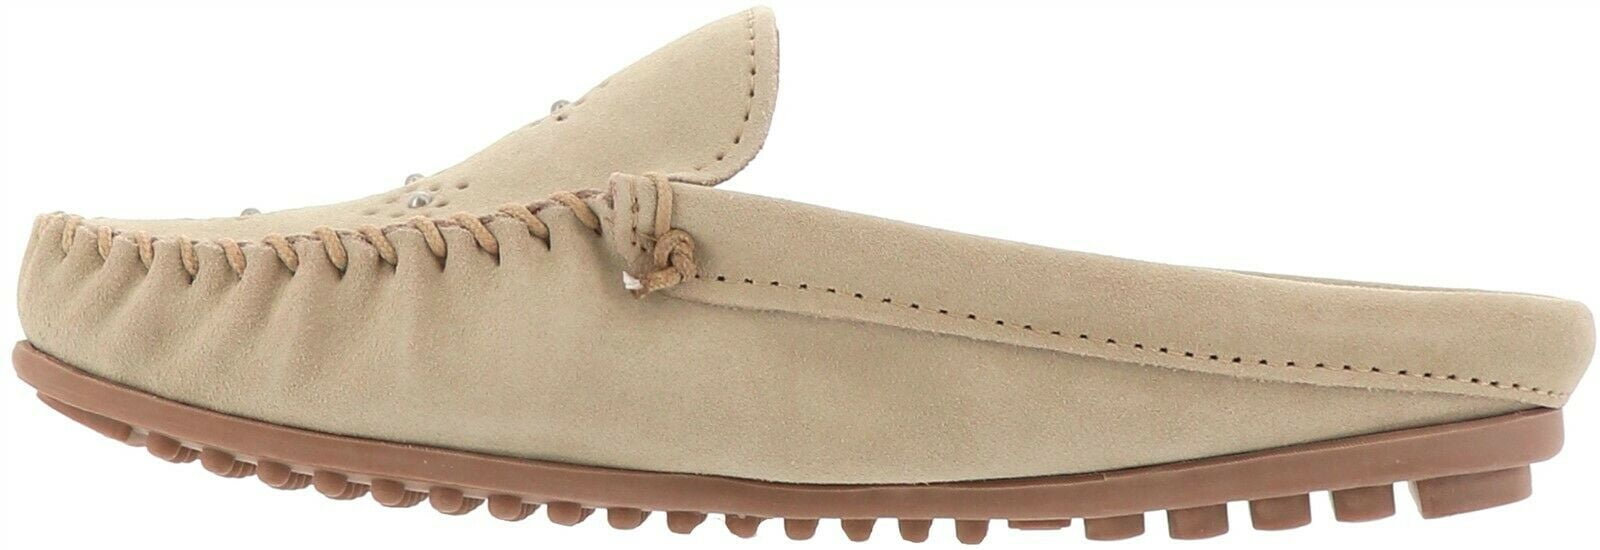 minnetonka suede moccasin mule with studs